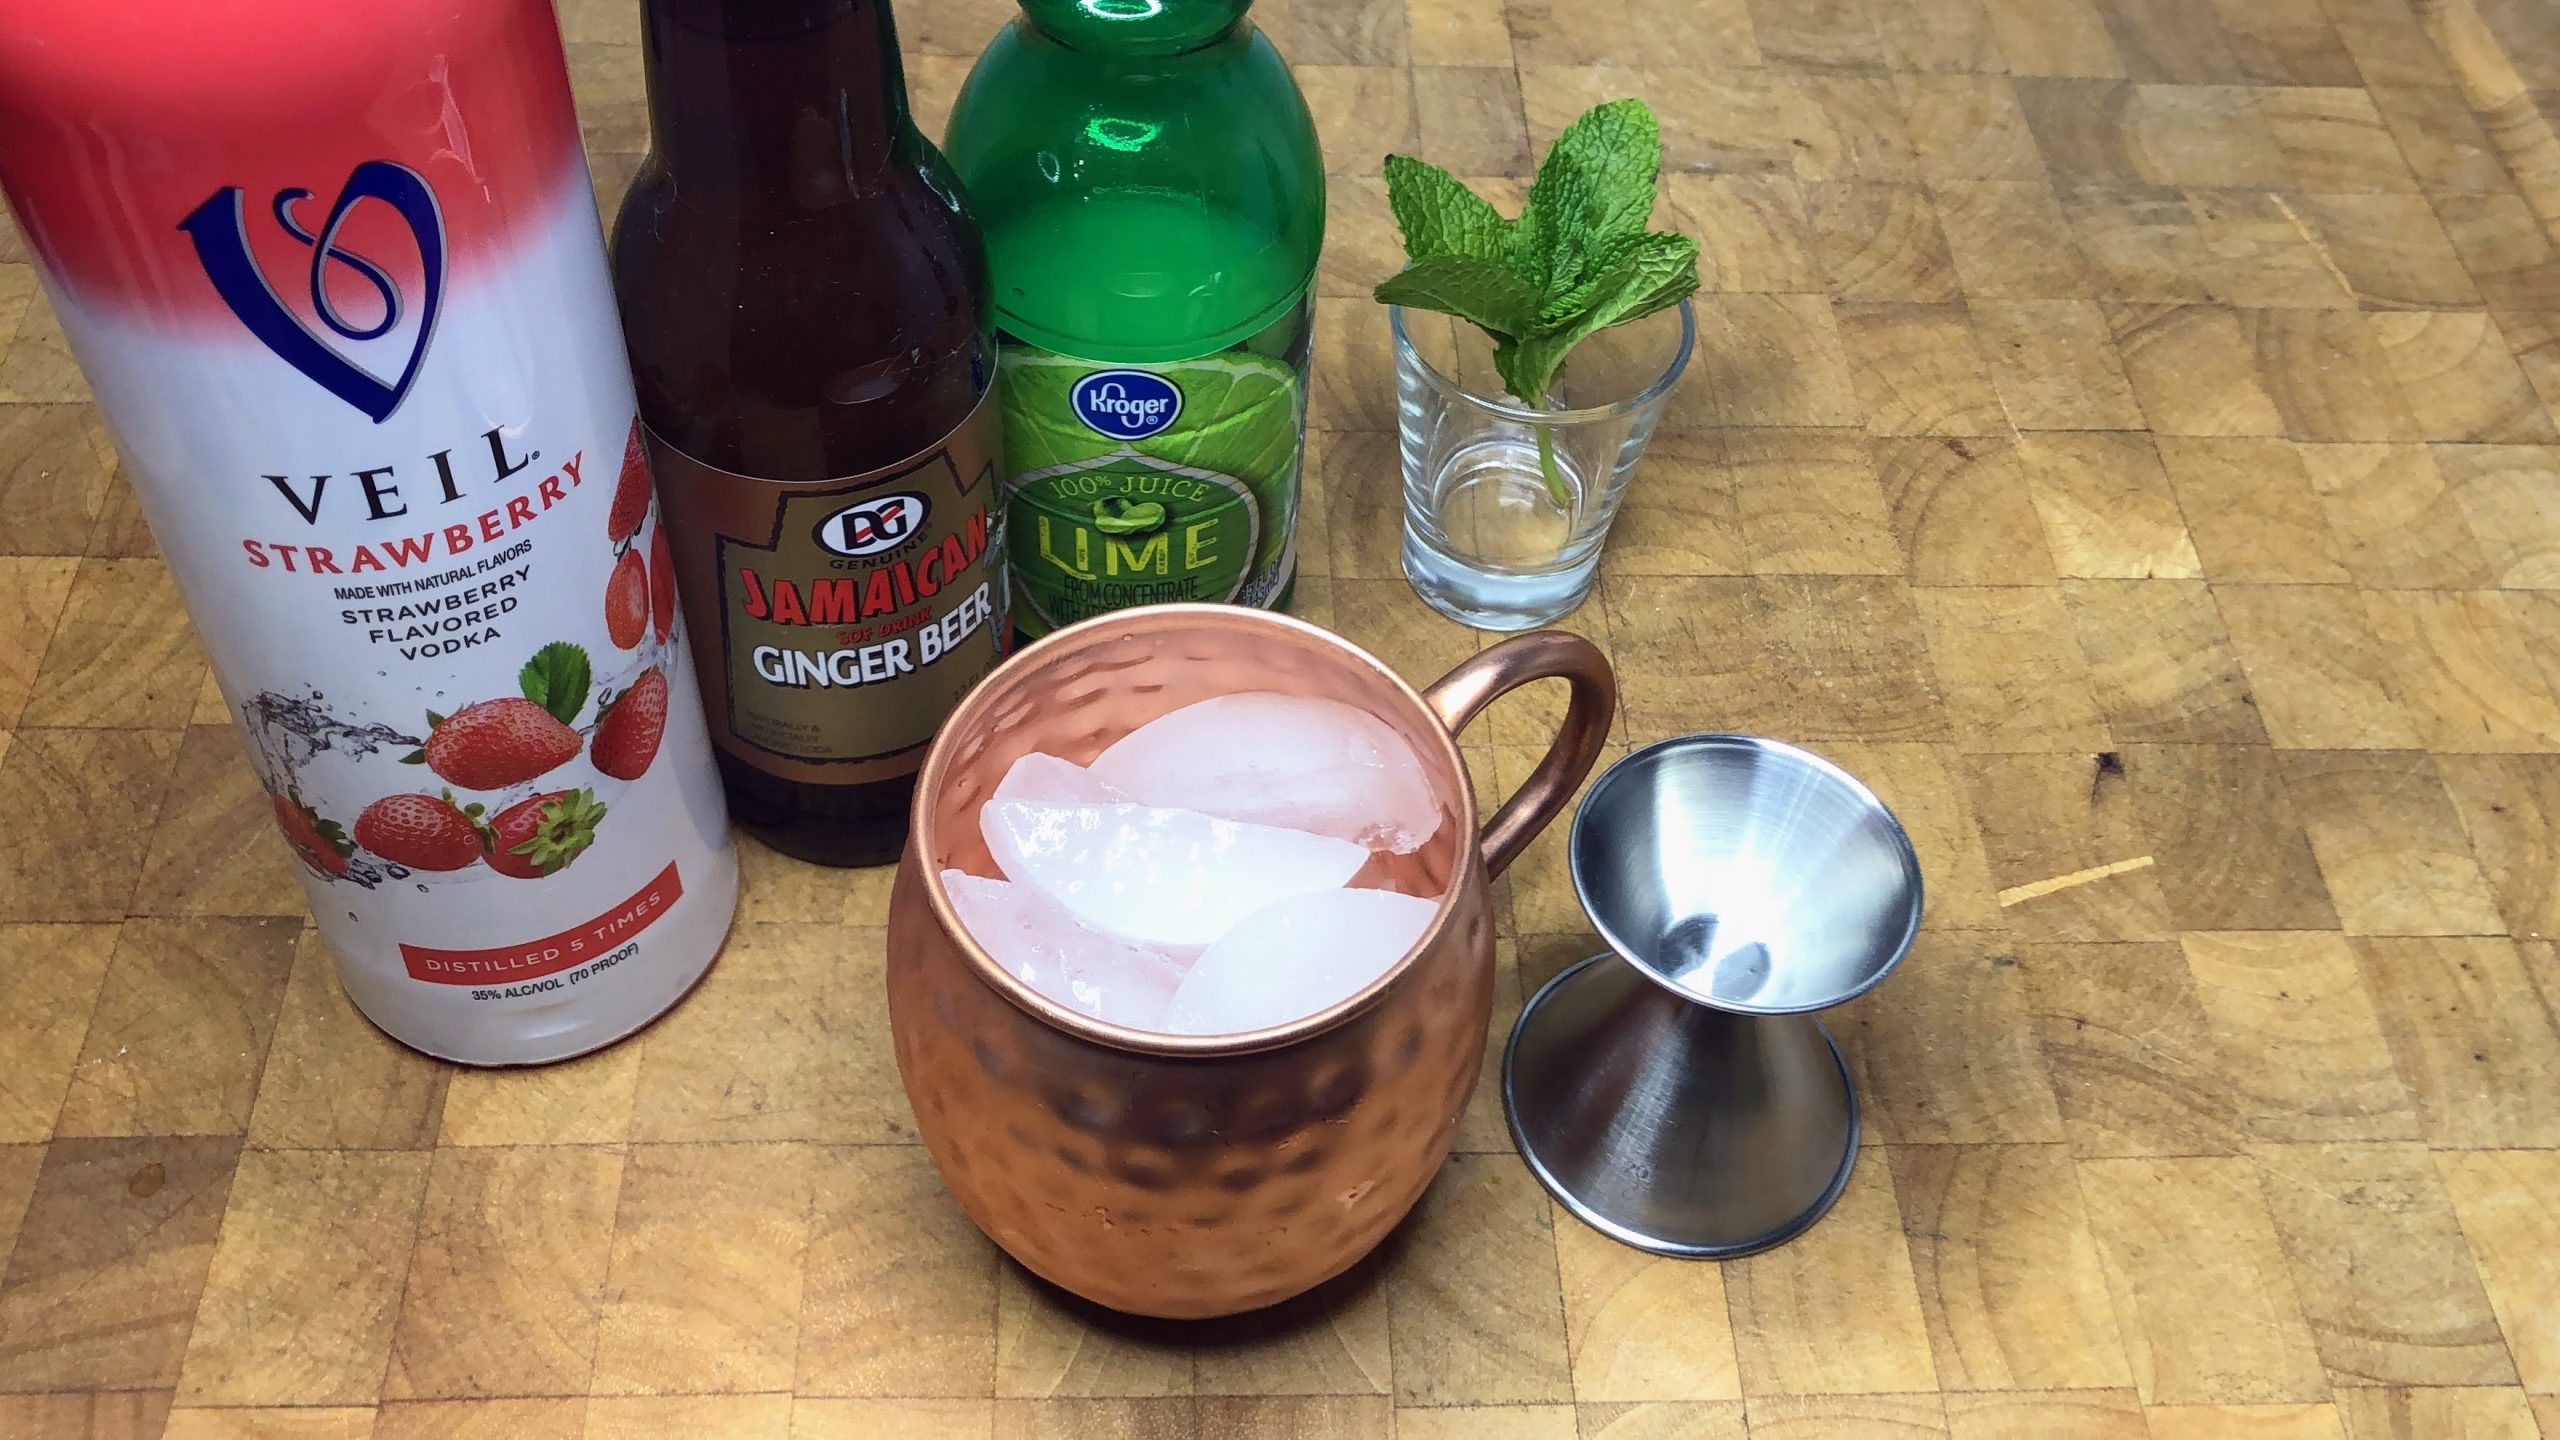 copper mug with ice next to jigger, sprig of mint, strawberry vodka, ginger beer and lime juice.